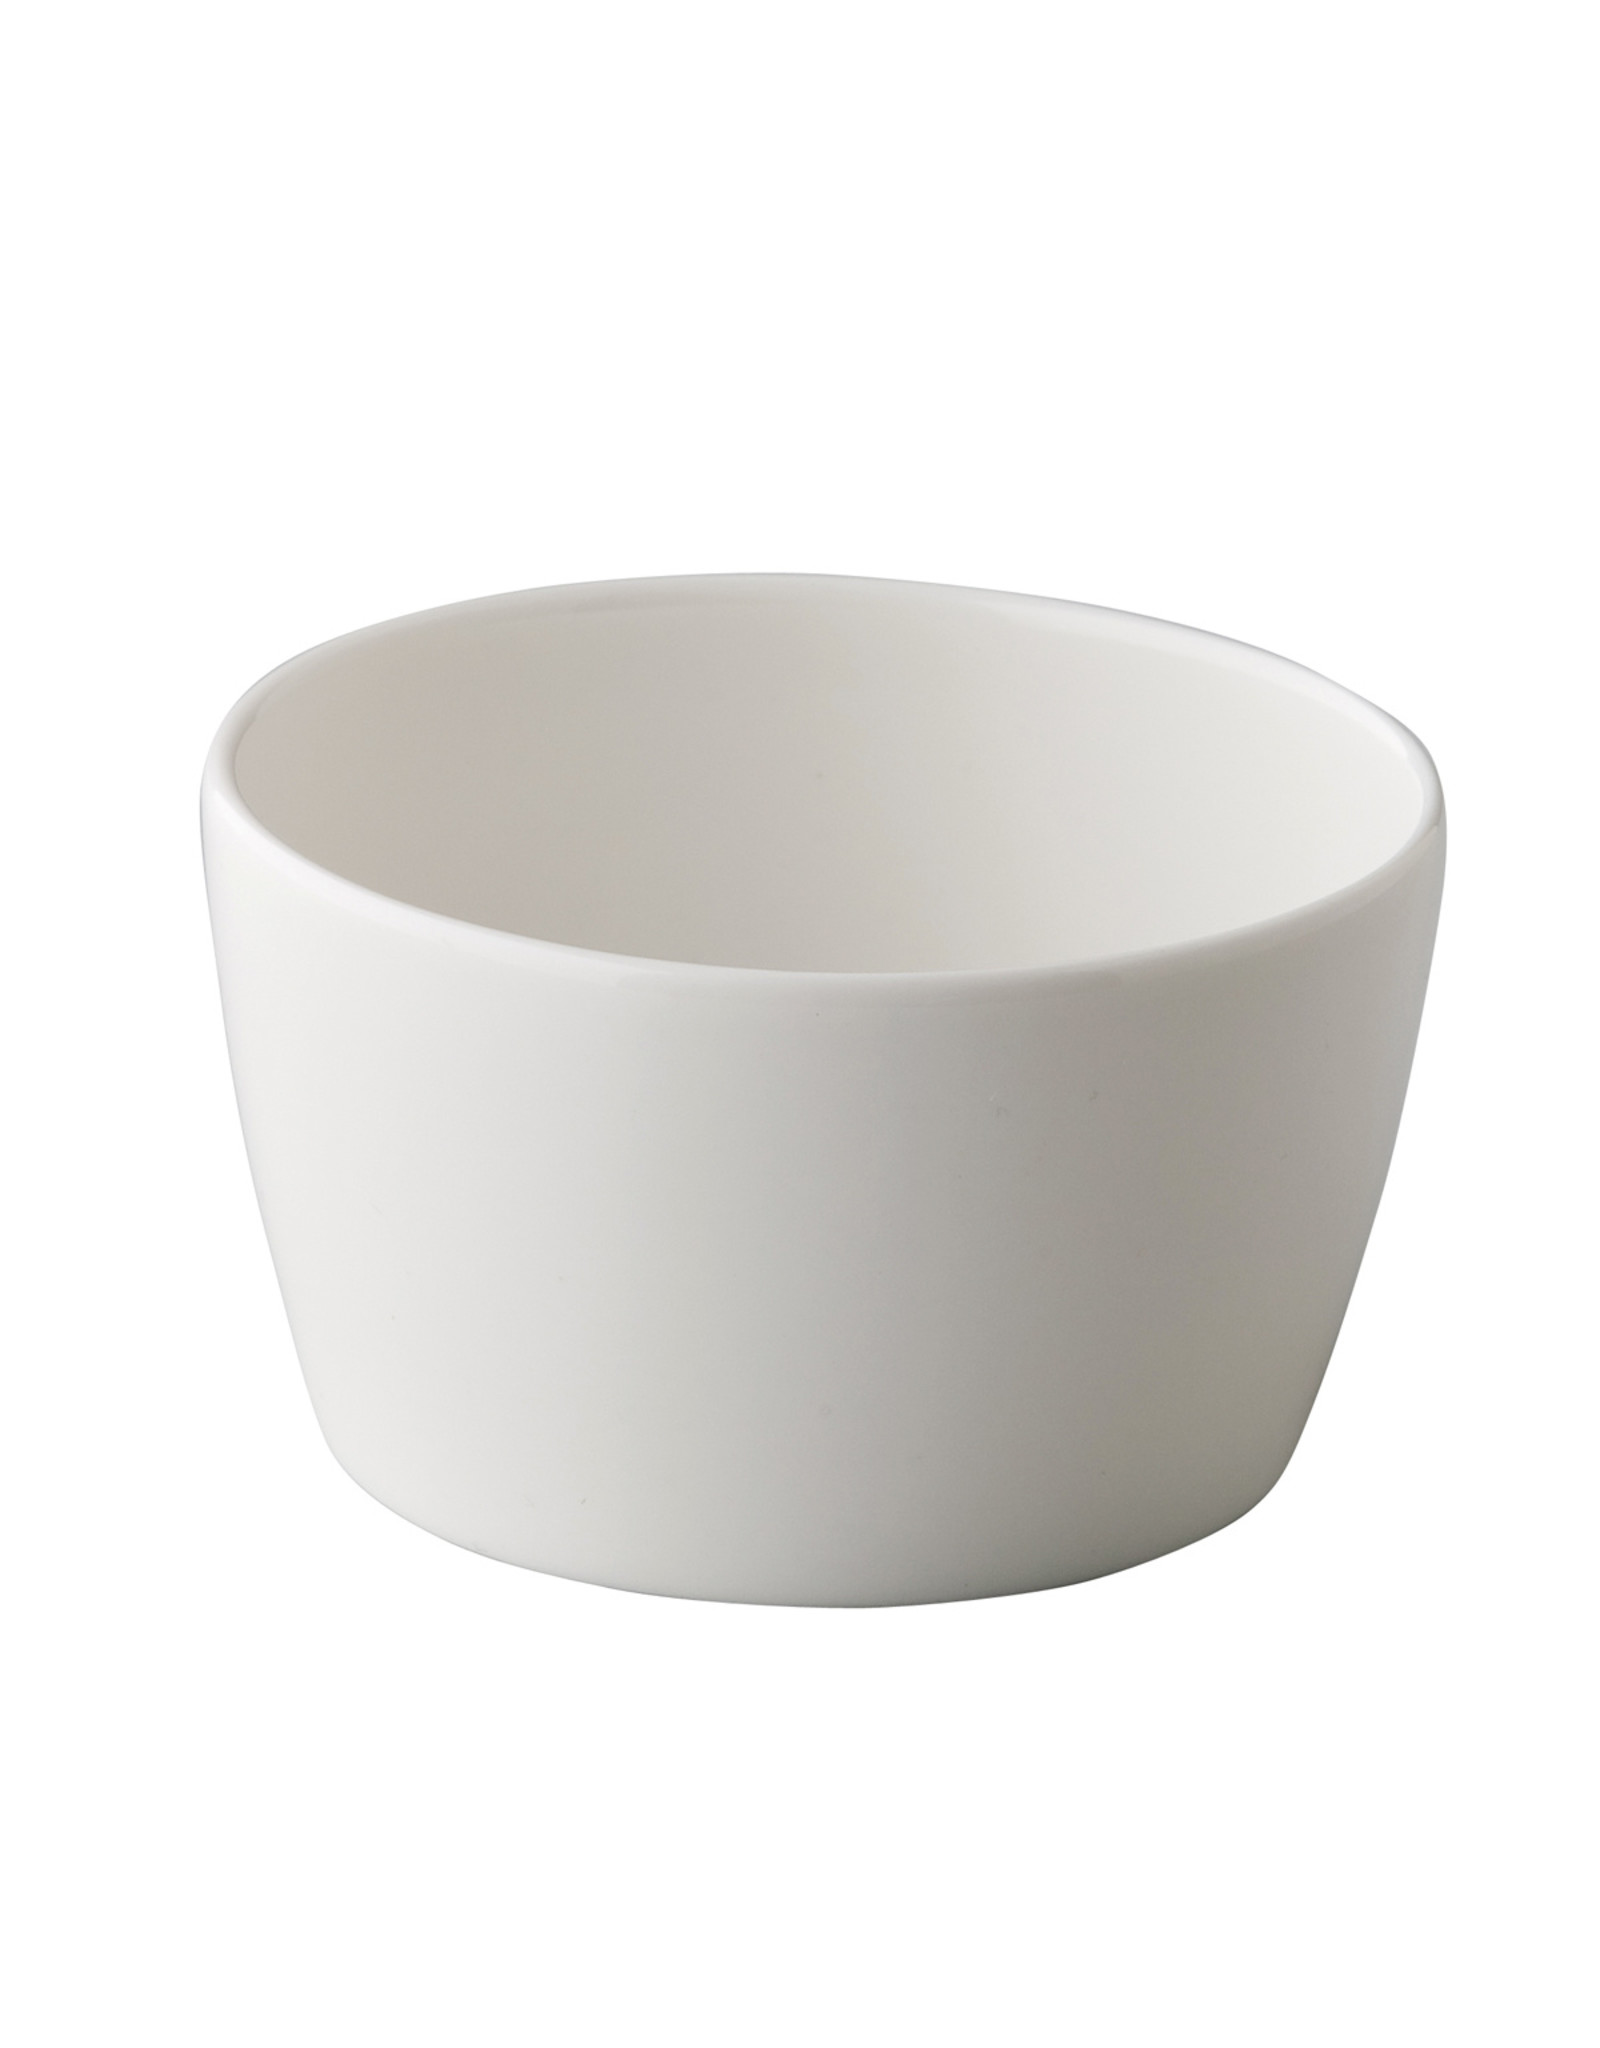 Stylepoint Q Fine China conical bowl 9 cm